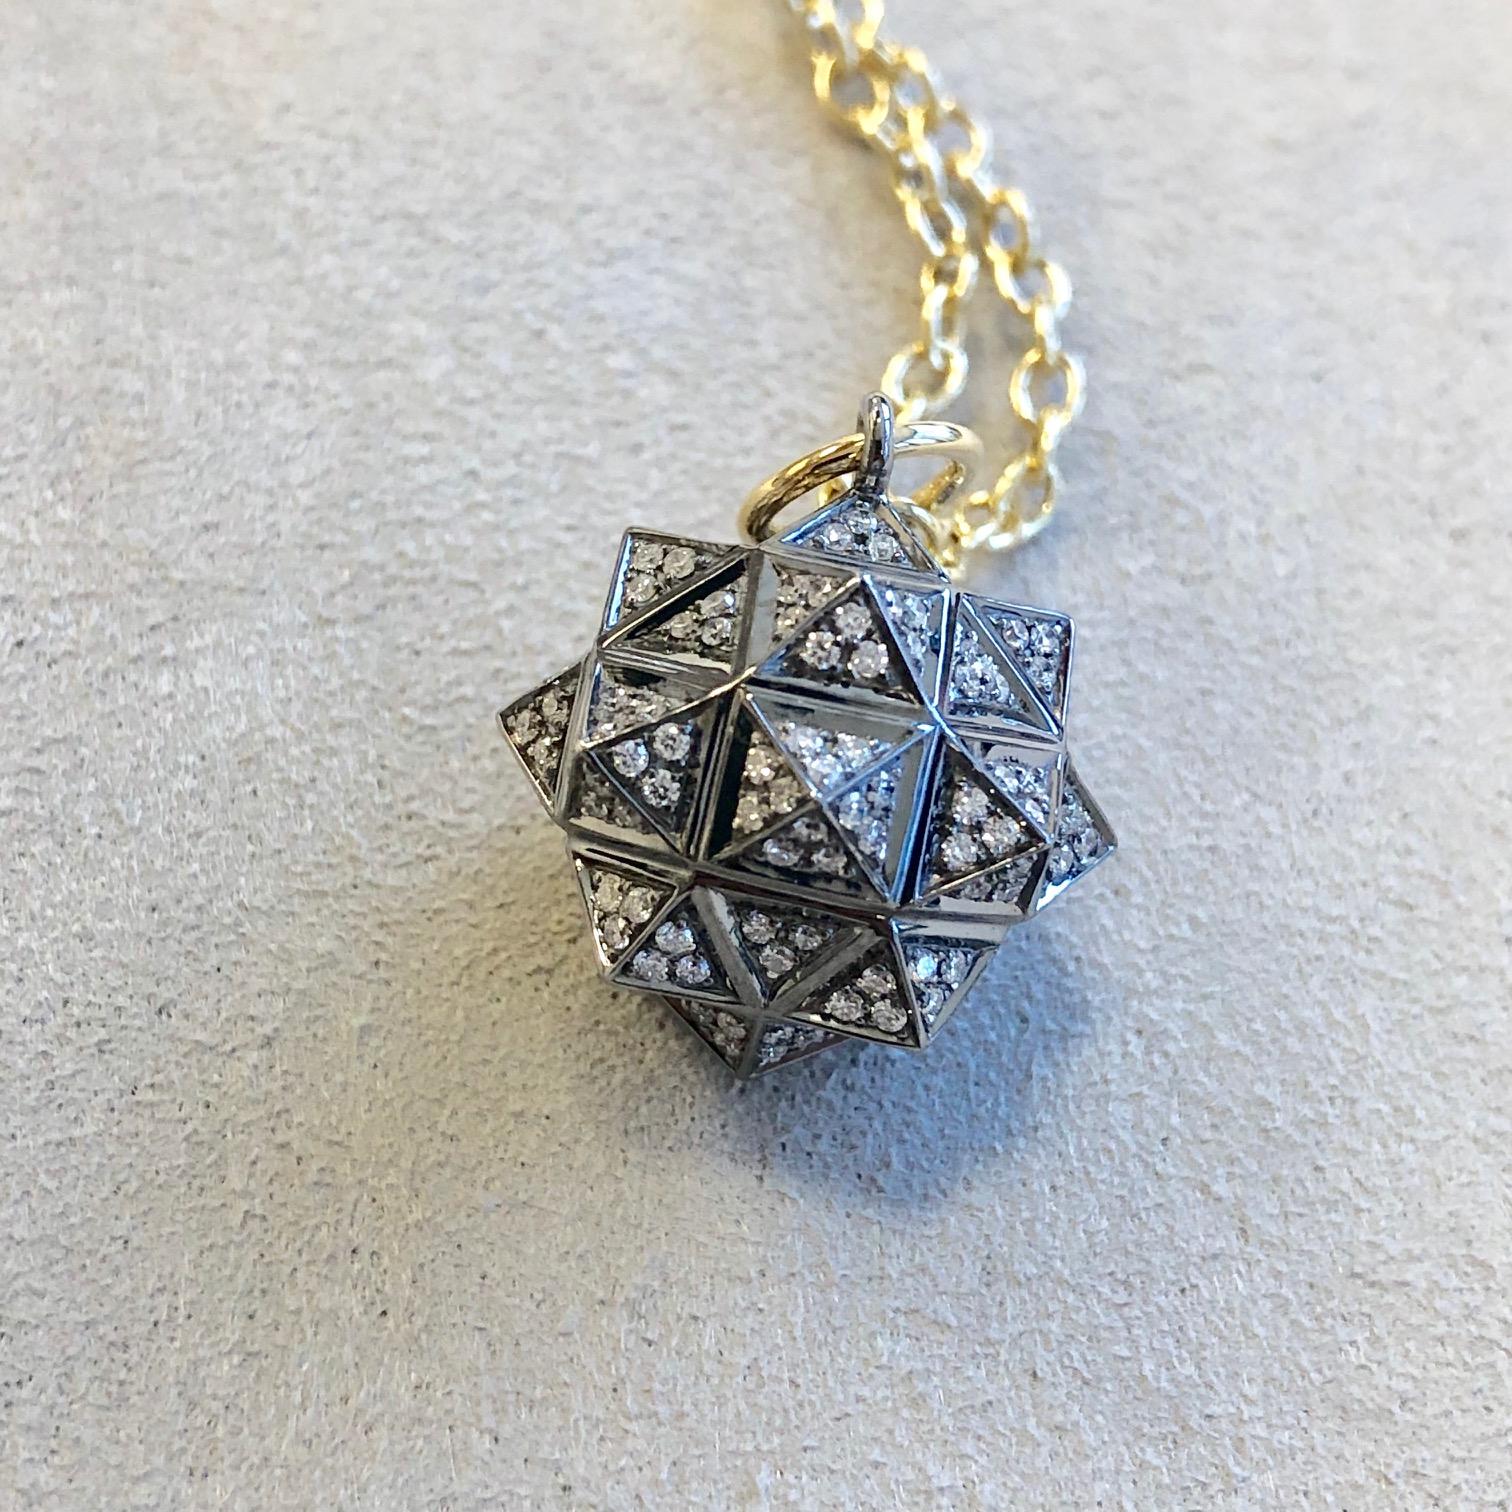 Created in oxidized silver with 18 karat yellow gold bail
Diamonds 1.20 cts approx
Chain sold separately
Limited edition

Crafted from 18 karat yellow gold, this one-of-a-kind pendant features a Oxidized Silver Star Ball Pendant with approximately 2